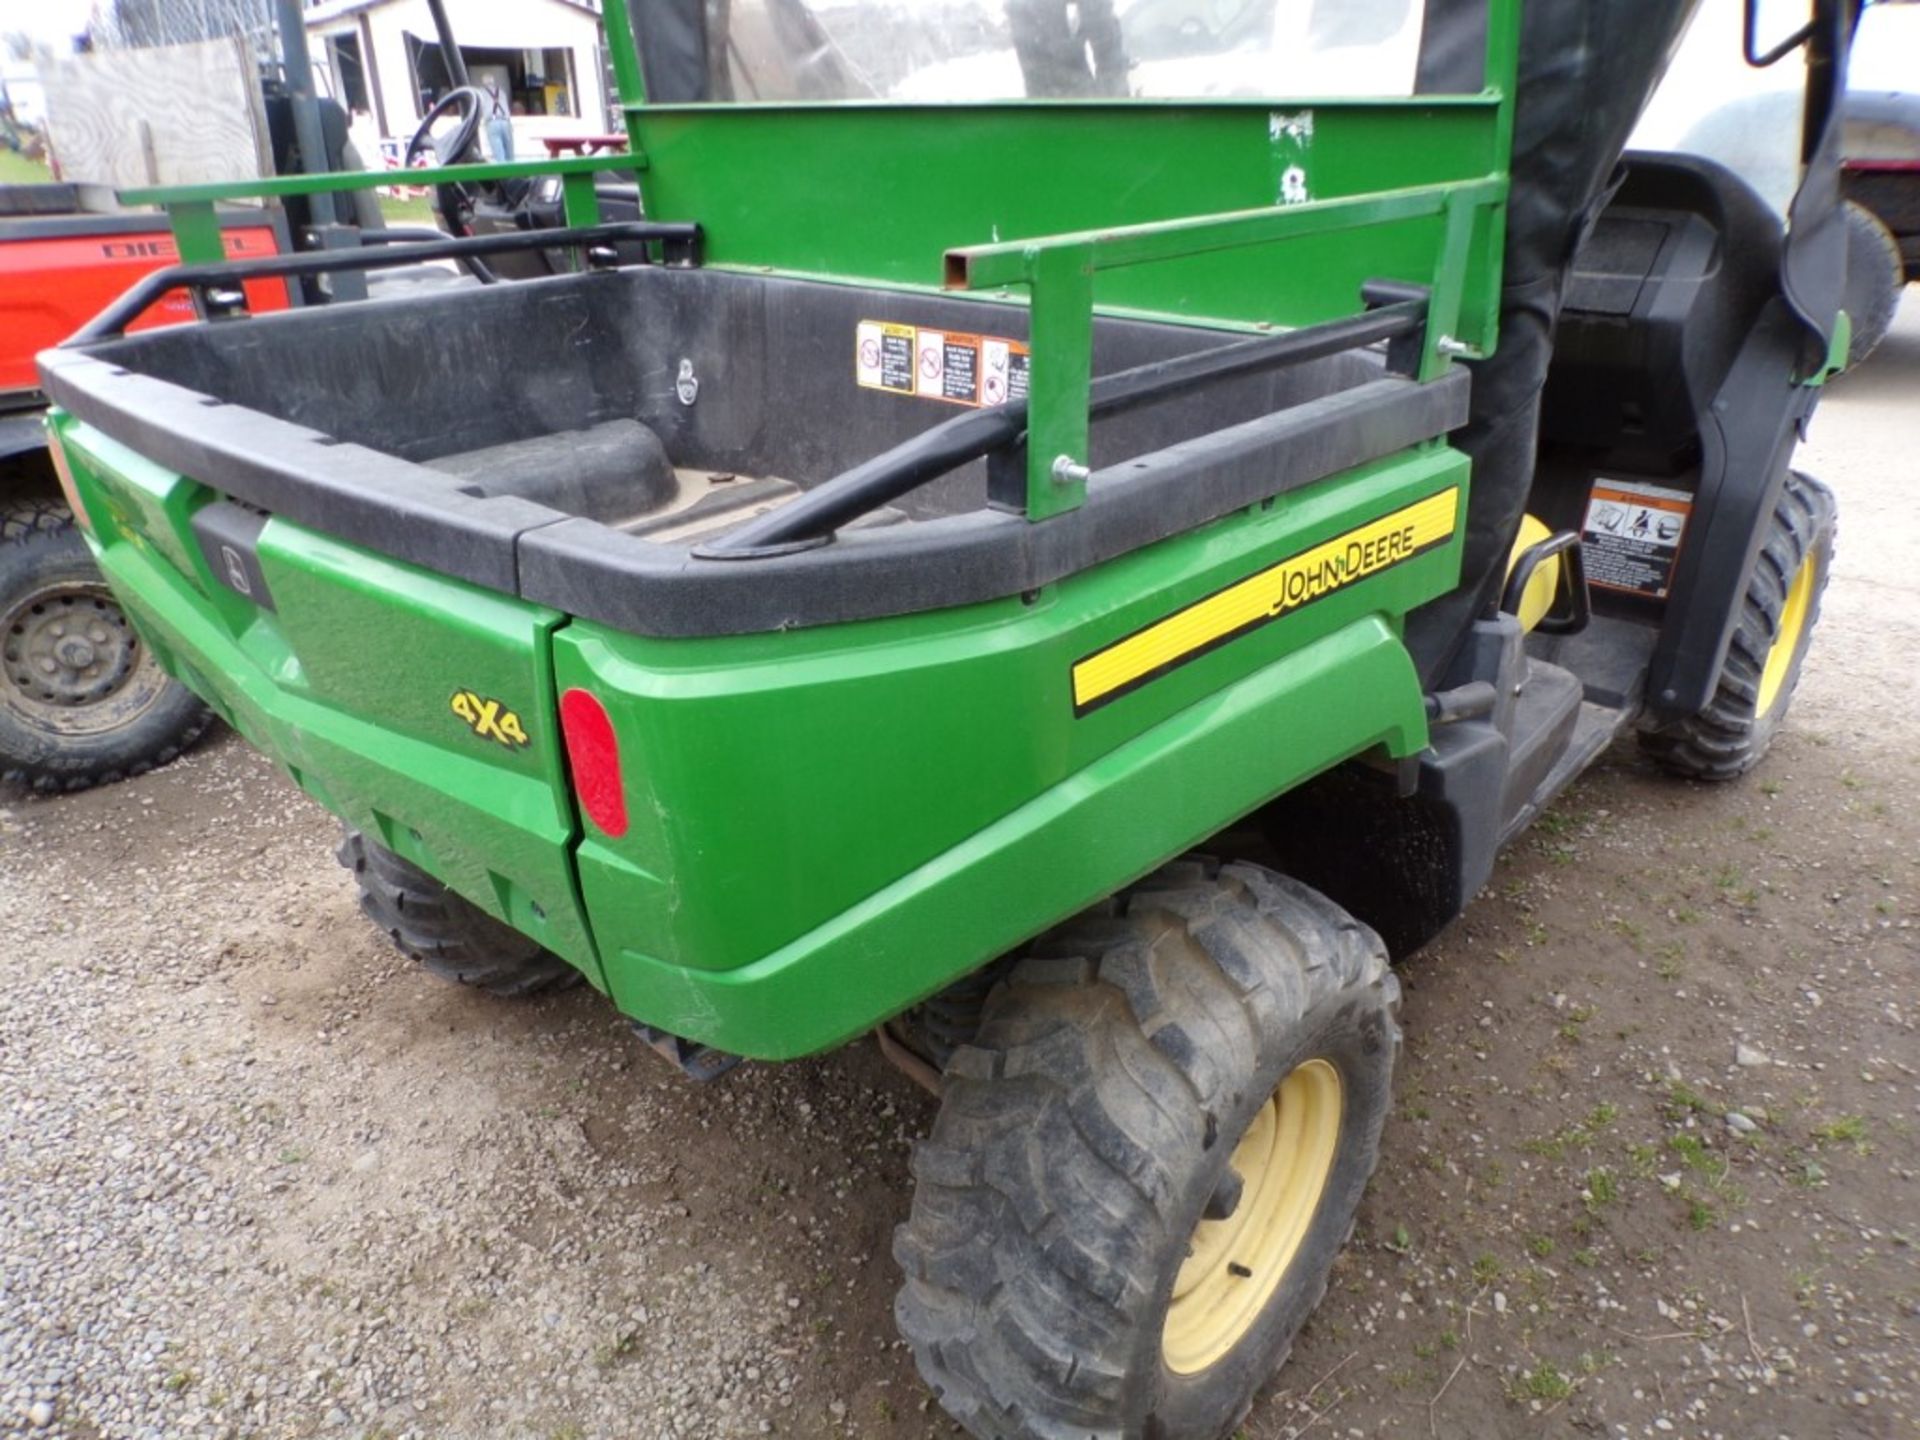 John Deere XUV-550 UTV with Canopy and Windshield, 4 WD, 395 Hrs., Super Nice, Ser.# 004802 (4365) - Image 5 of 6